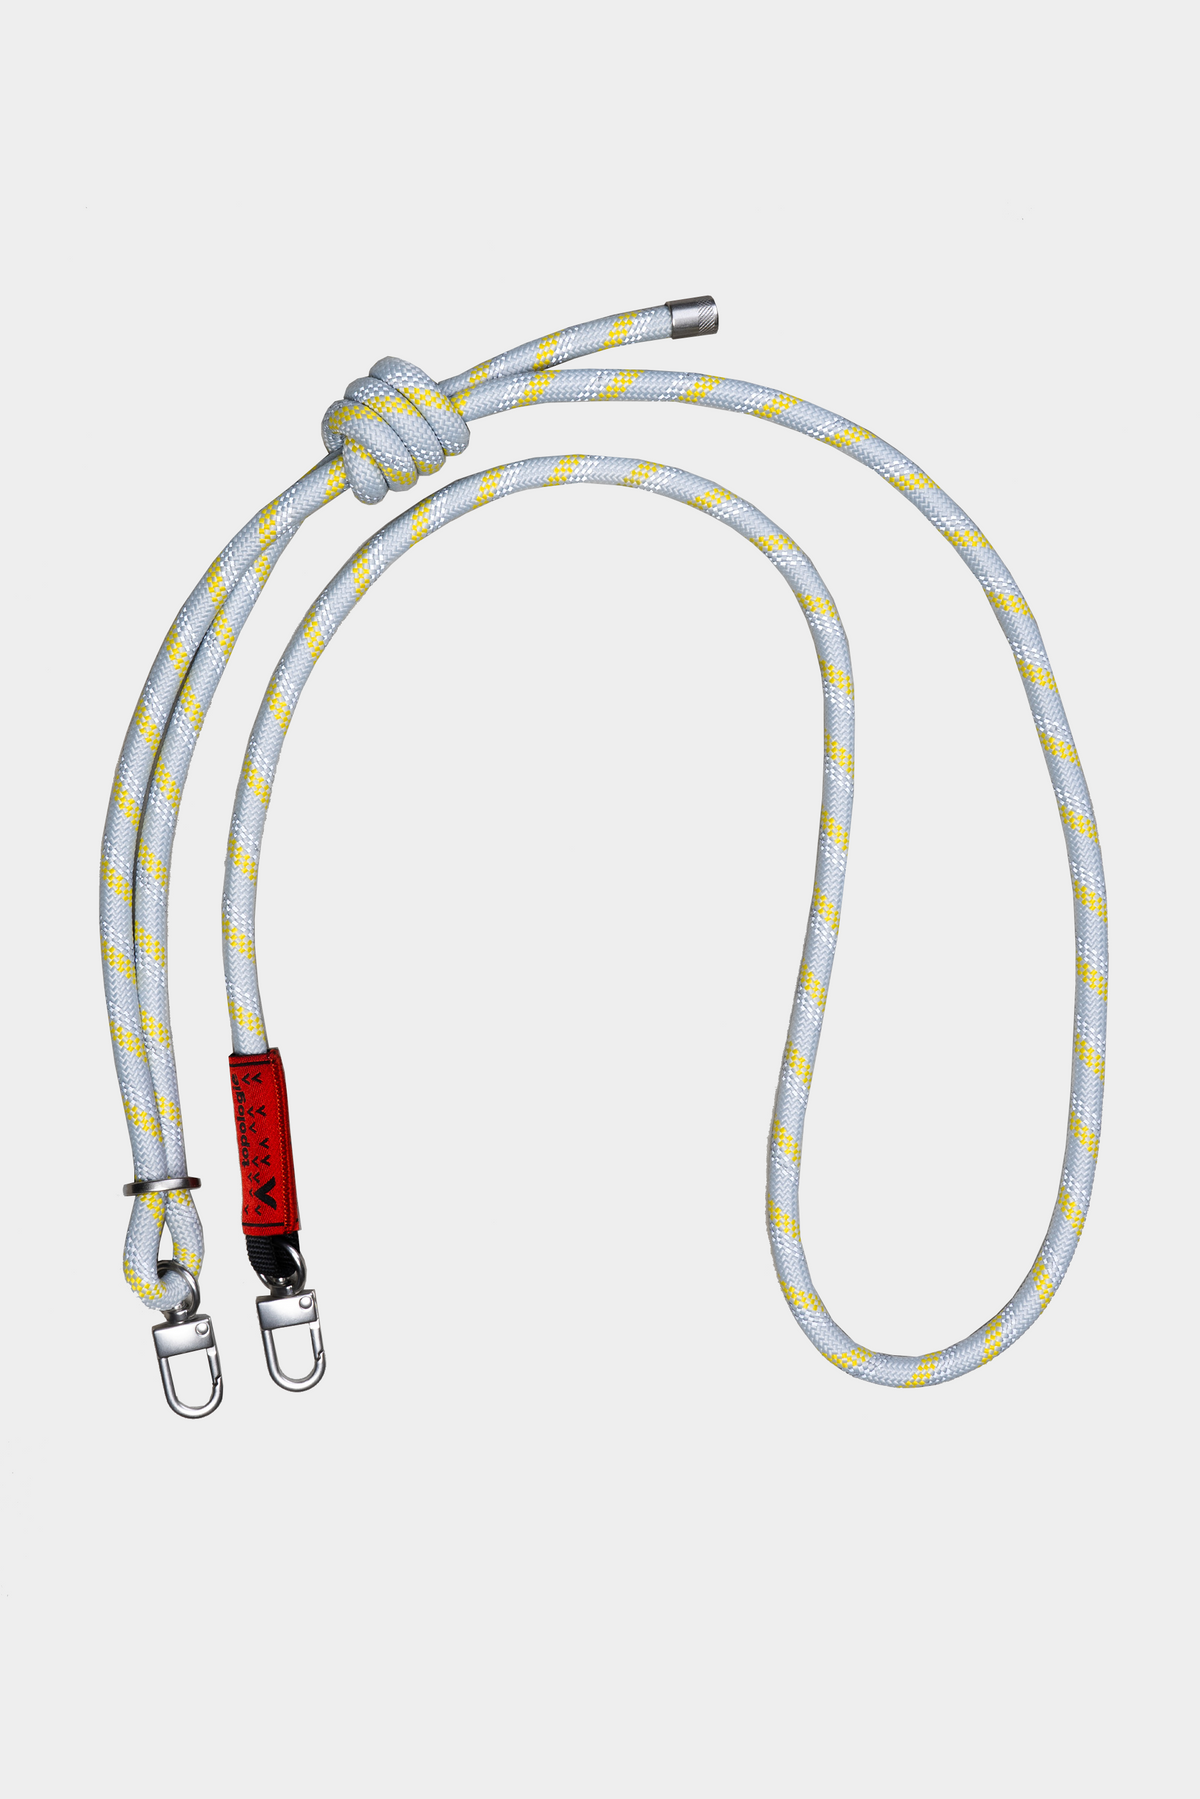 DISTANCE X TOPOLOGY - WARE STRAP 8mm ROPE STRAP